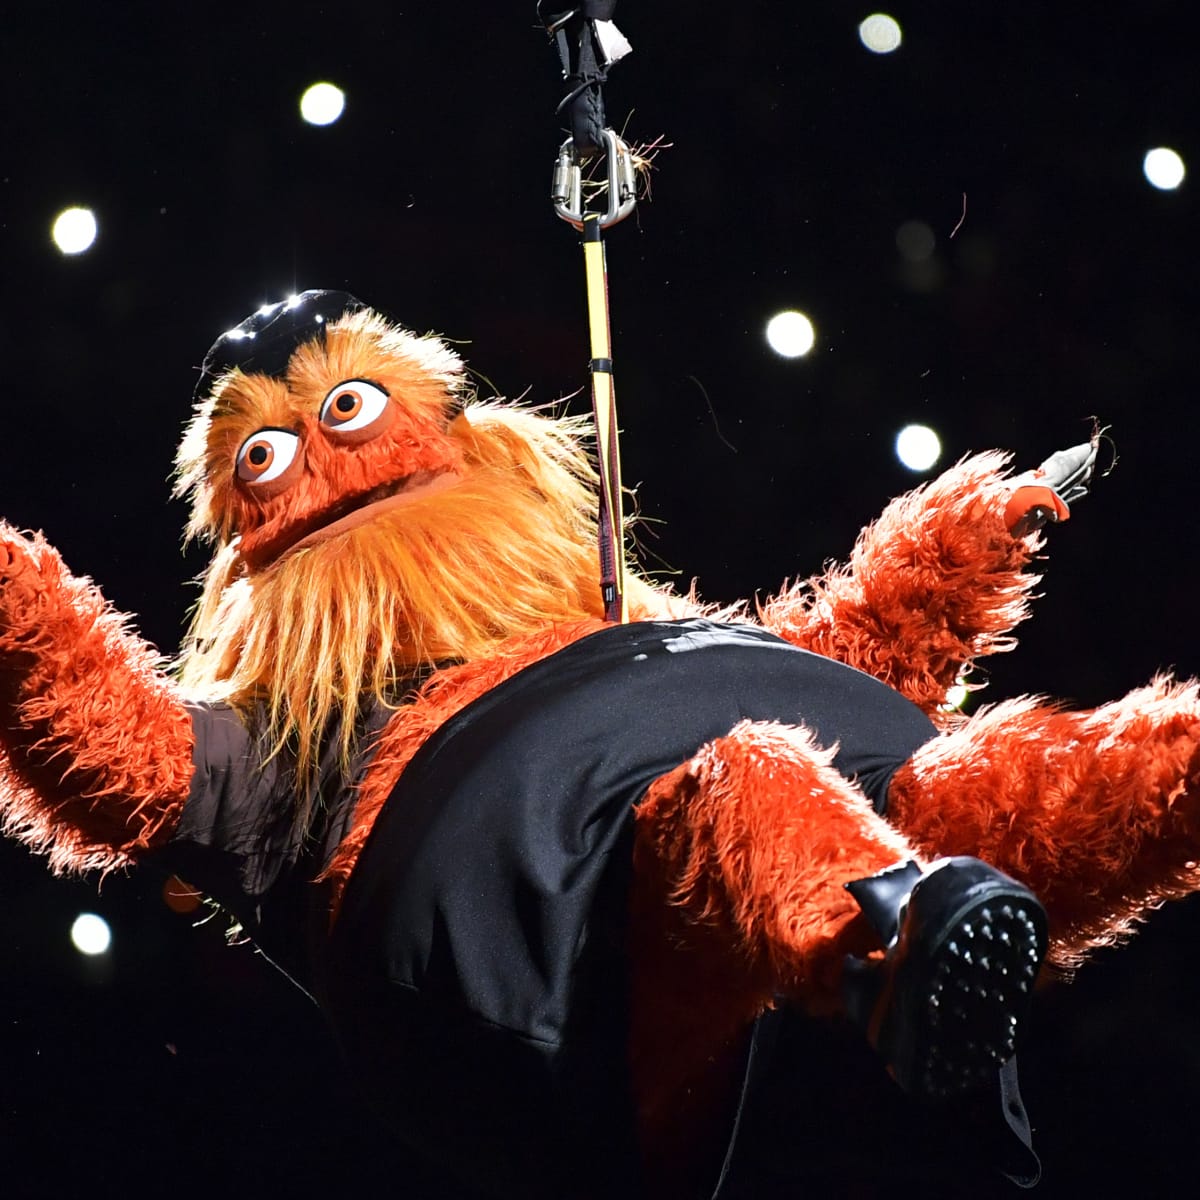 Gritty Q&A: Catching up with the Flyers' mascot - Sports Illustrated